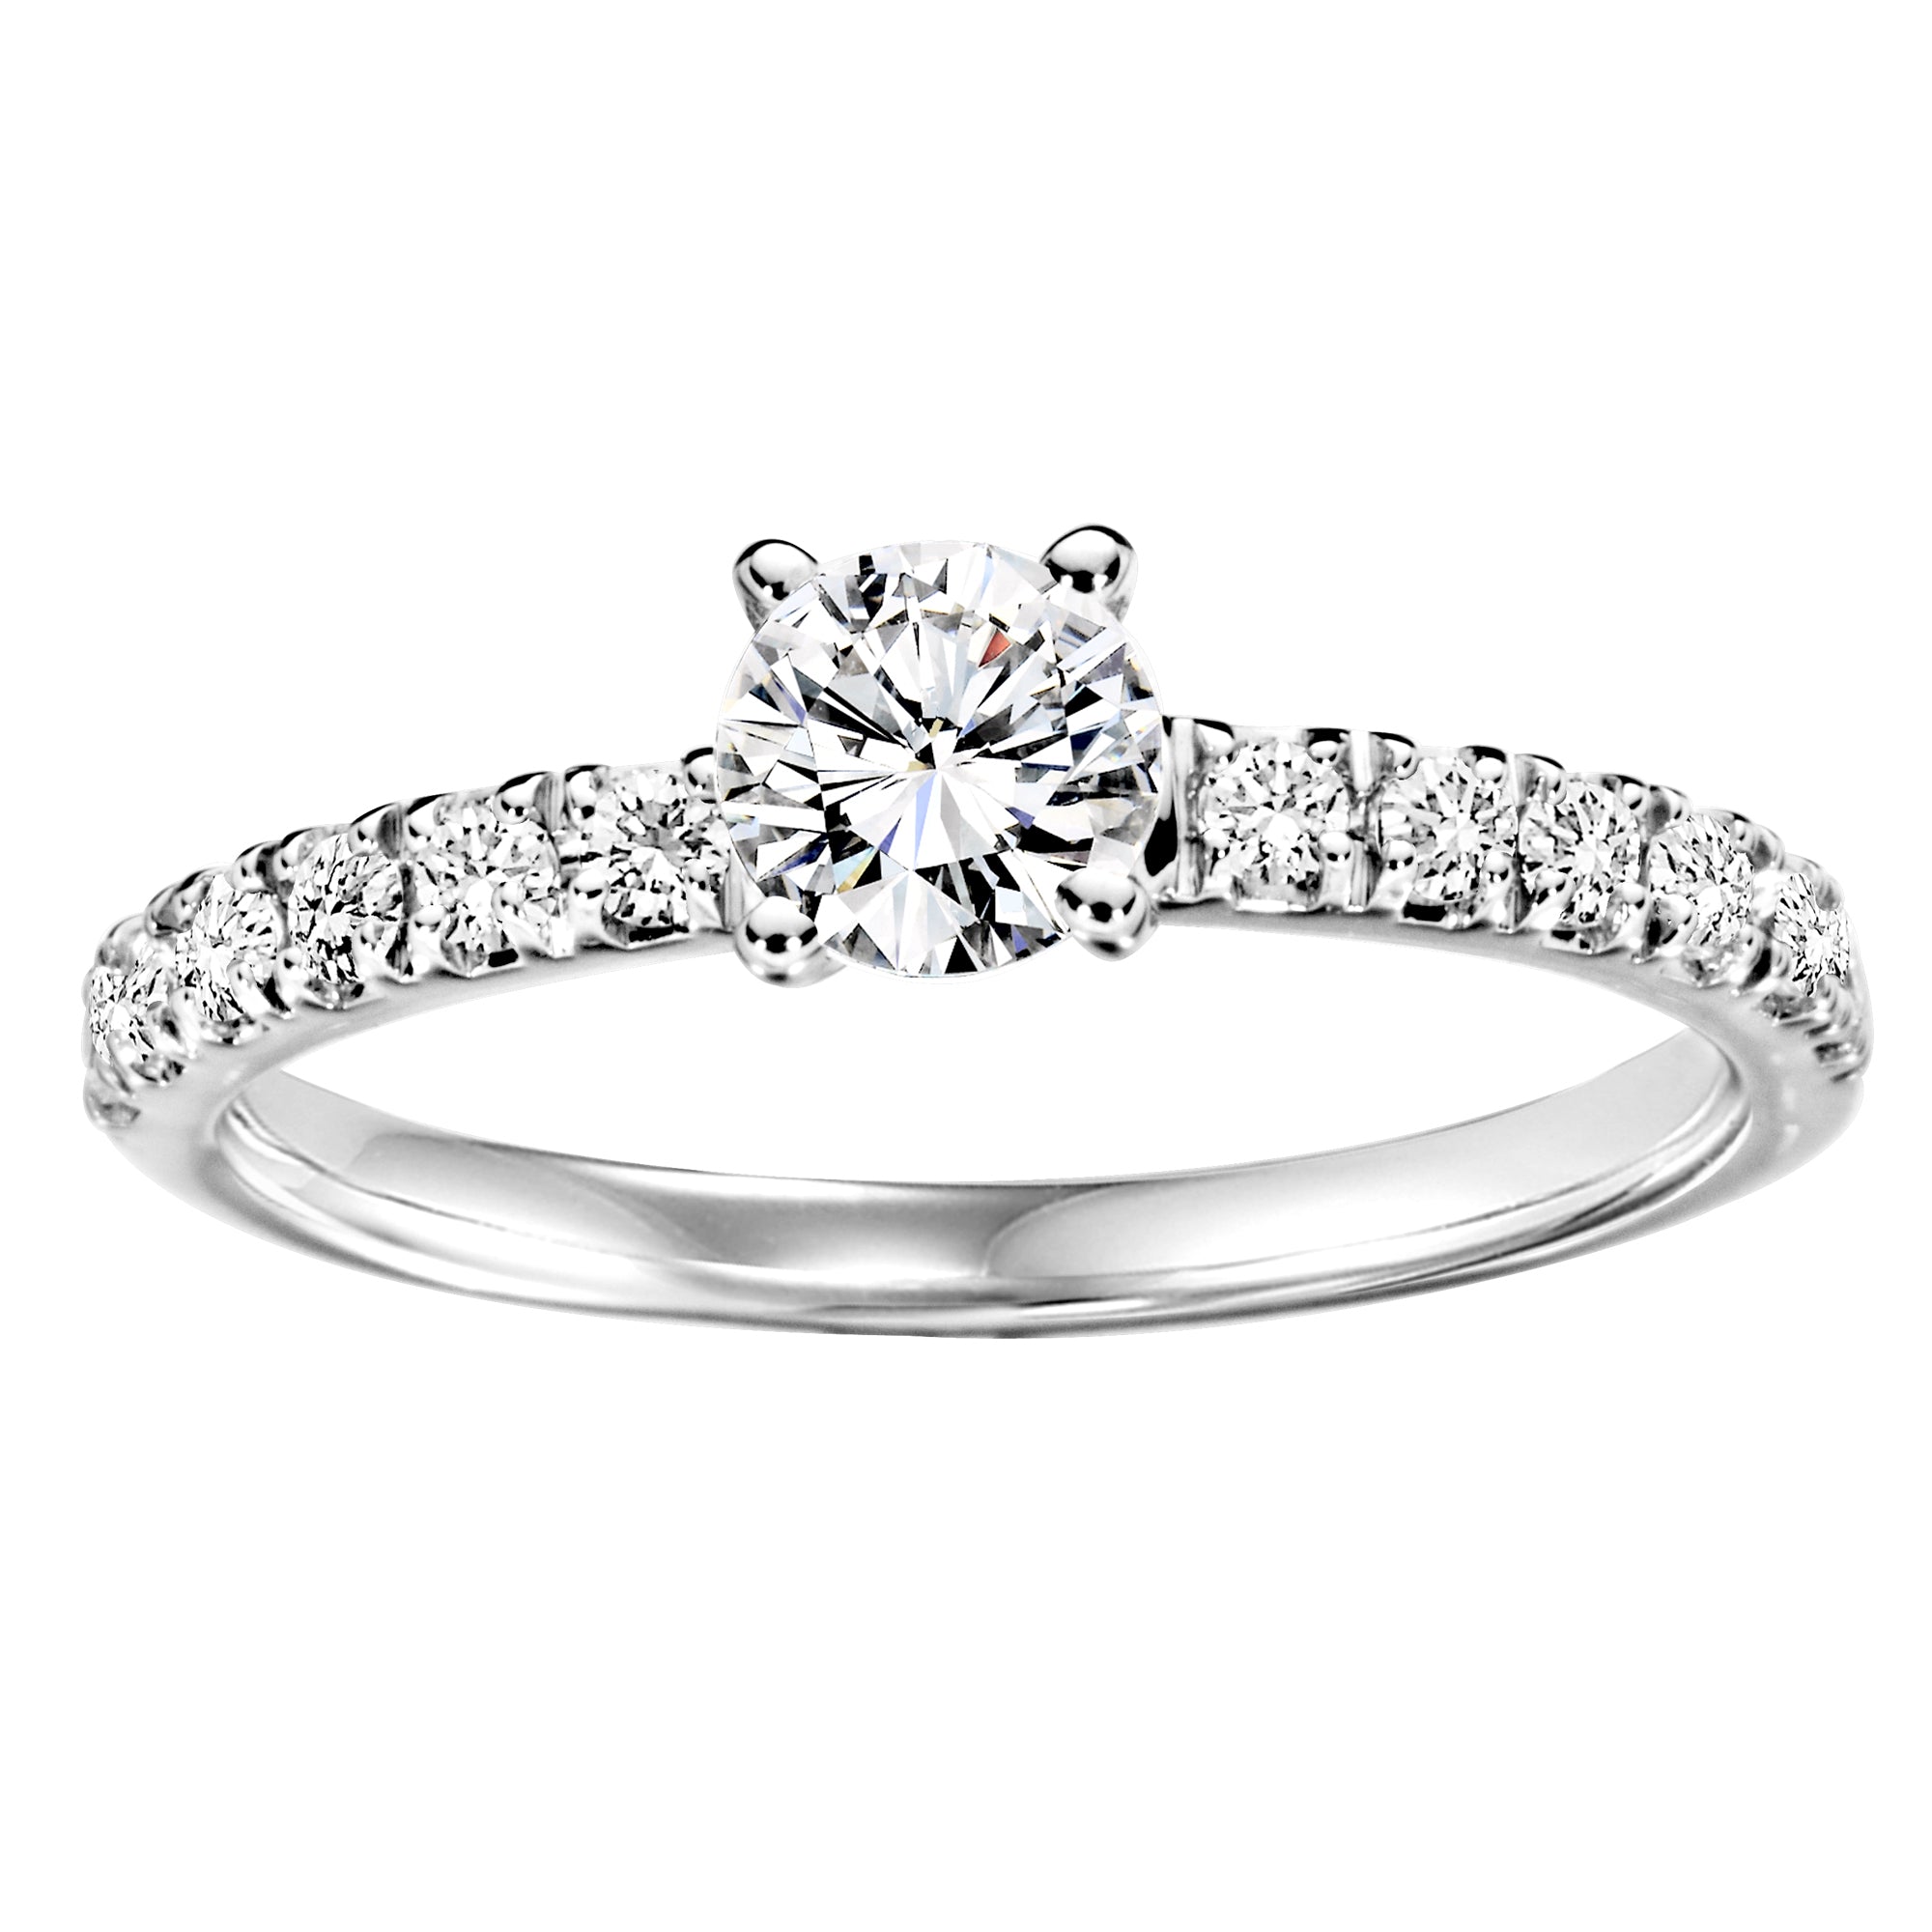 Sterling Silver Cubic Zirconia 0.75ct Ring - AK1024 - Hallmark Jewellers Formby & The Jewellers Bench Widnes